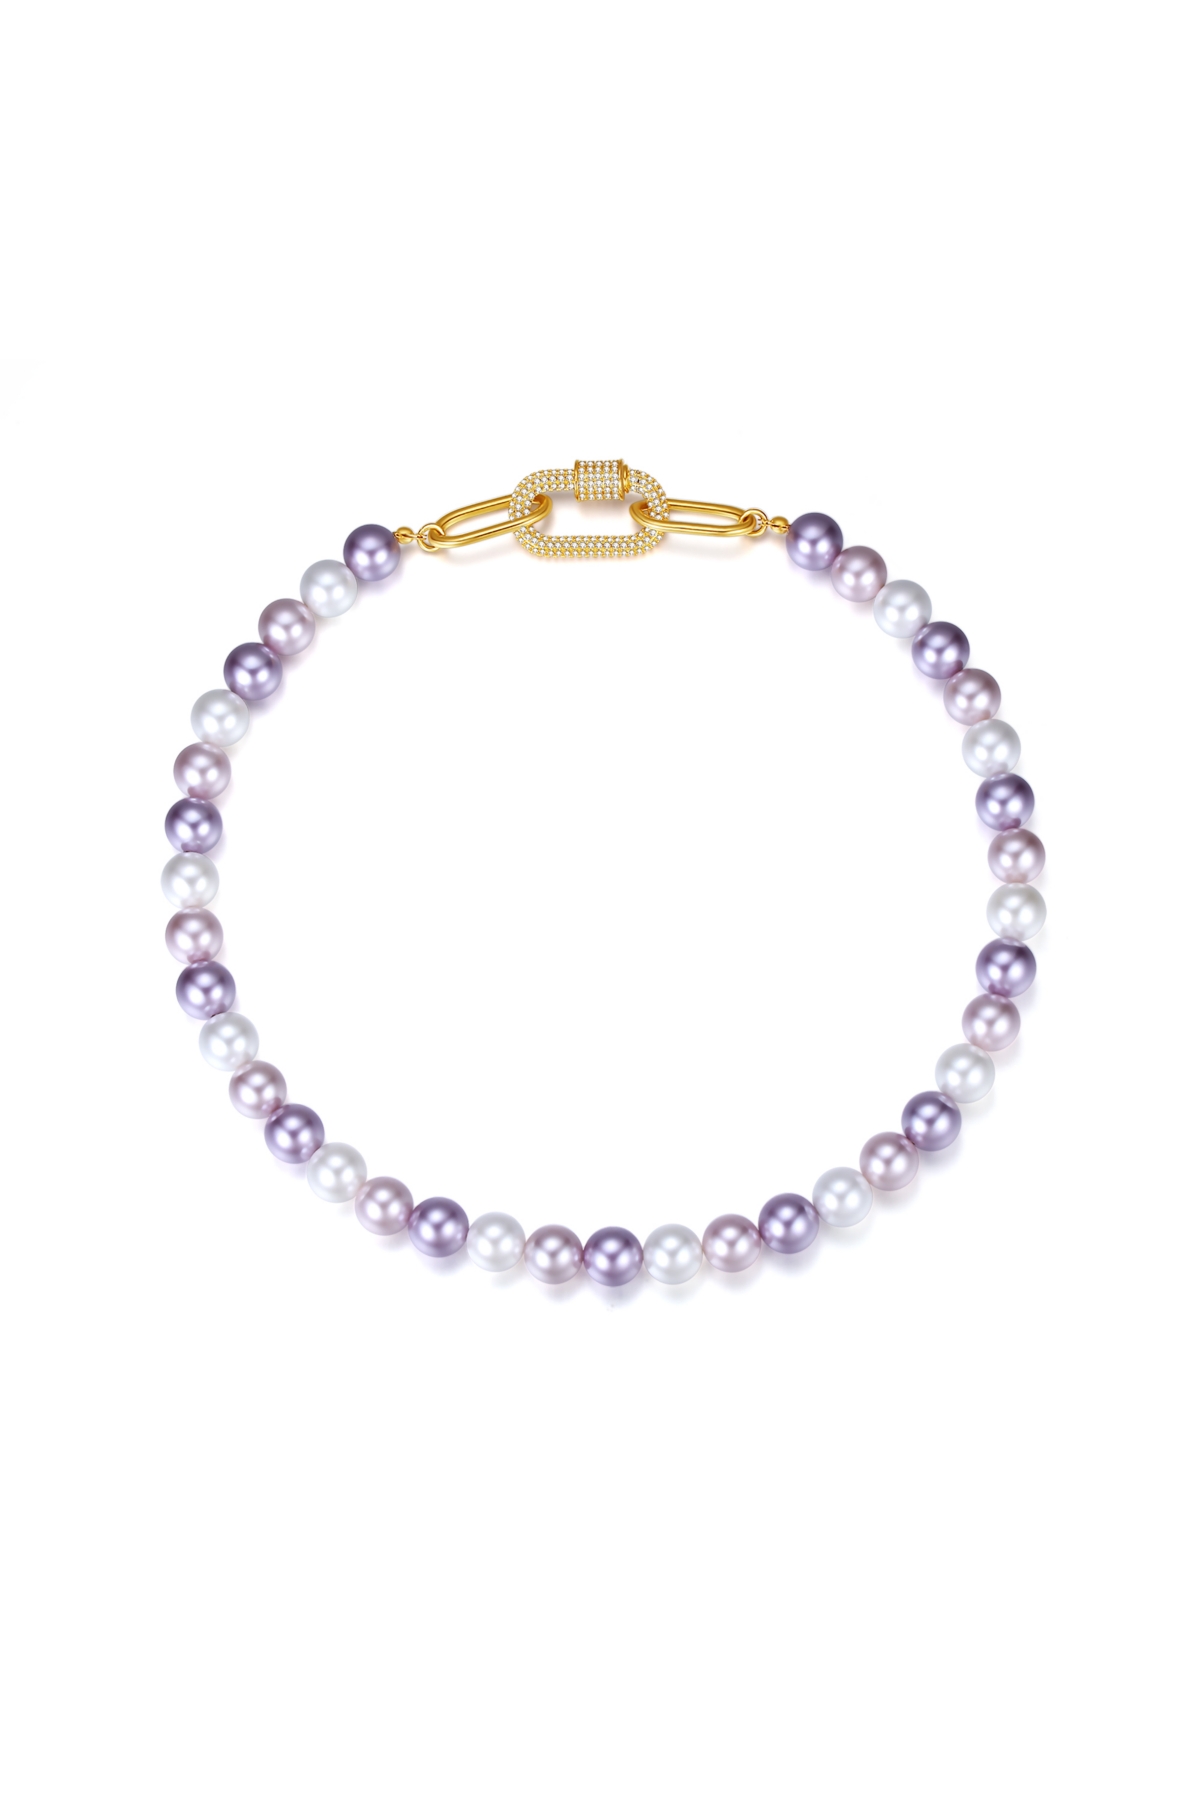 Shell Pearl Necklace with Gem-Encrusted Carabiner Lock (Small) - Purple